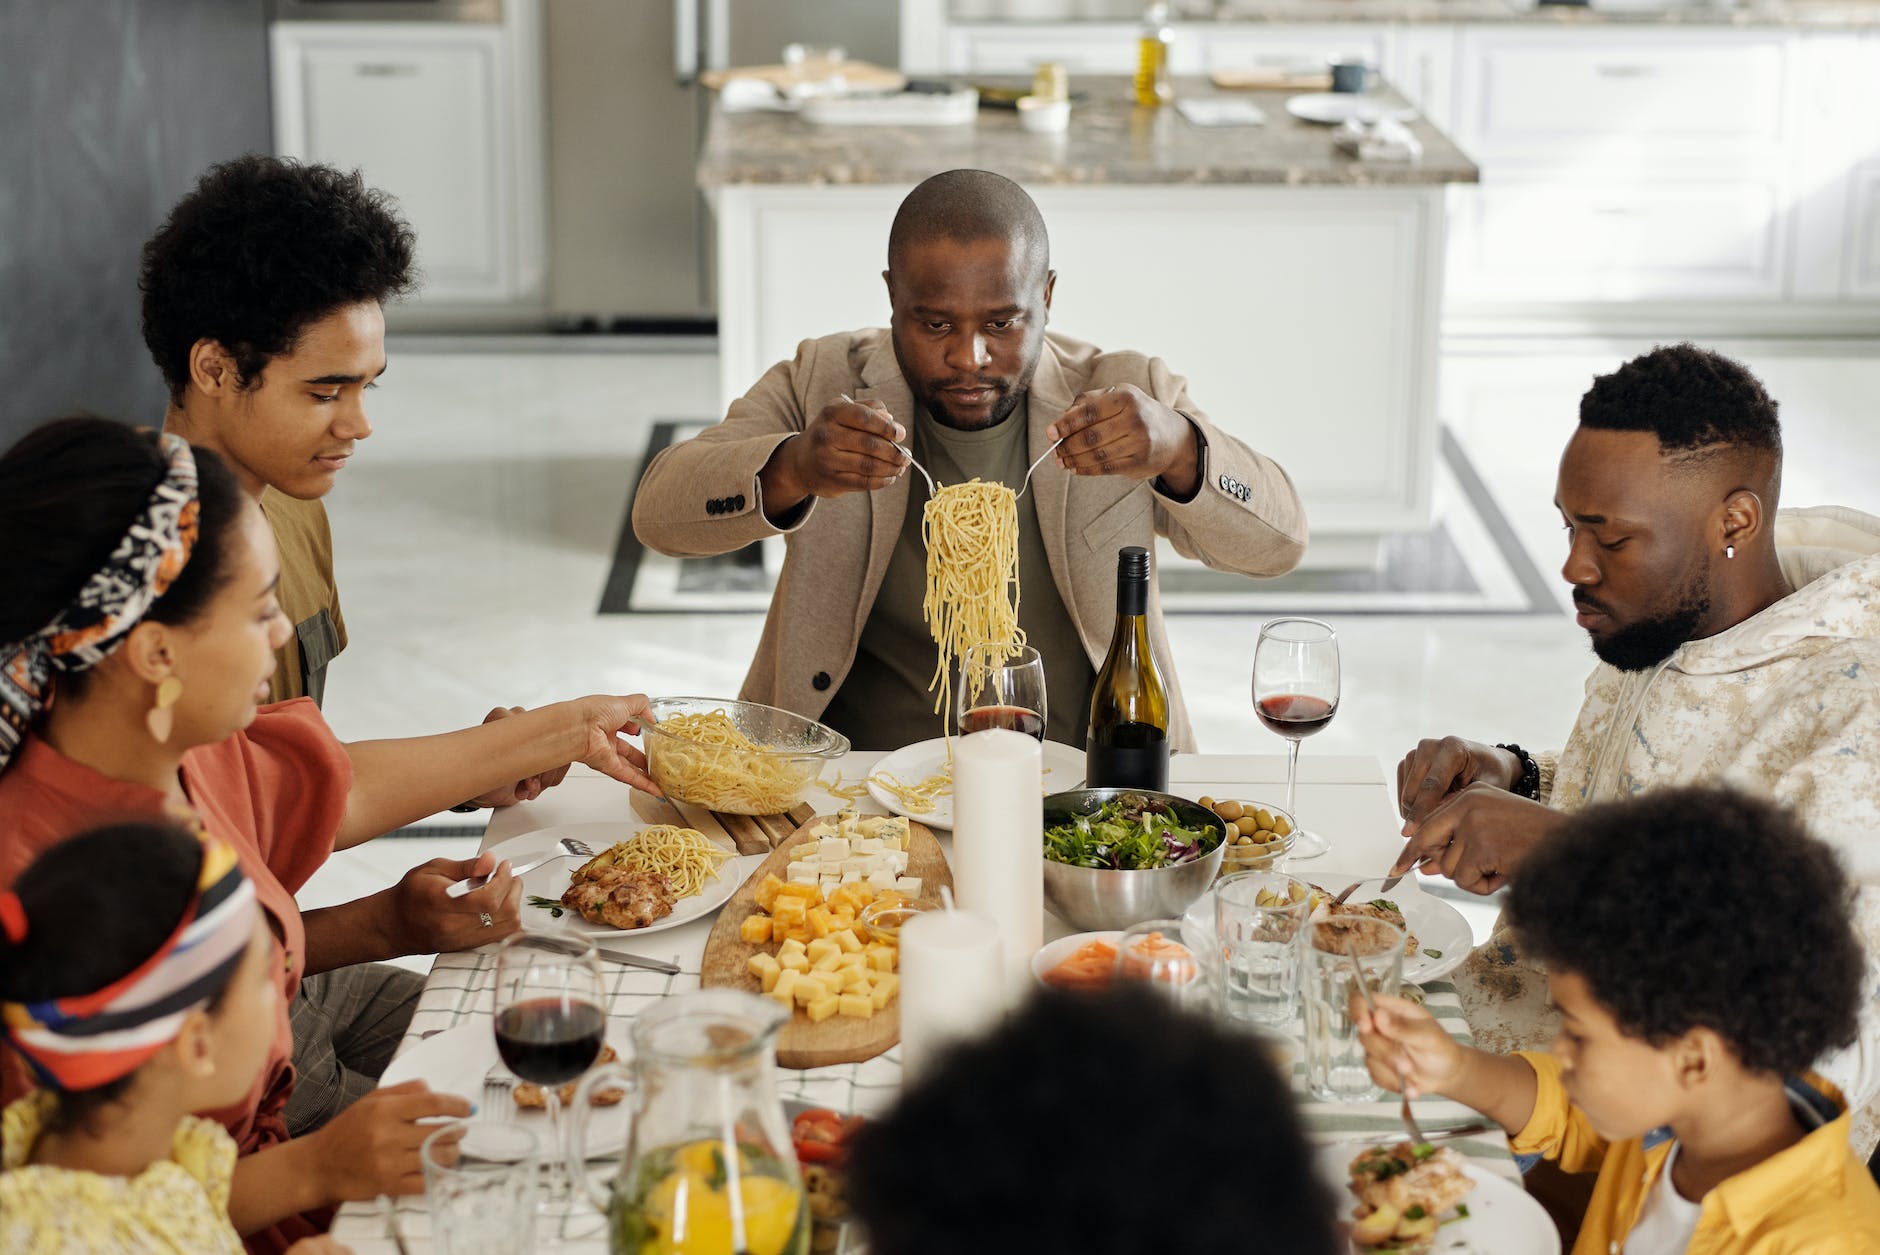 A family sat around a table eating a meal. A man sat at the head of the table holds up a serving on pasta. 